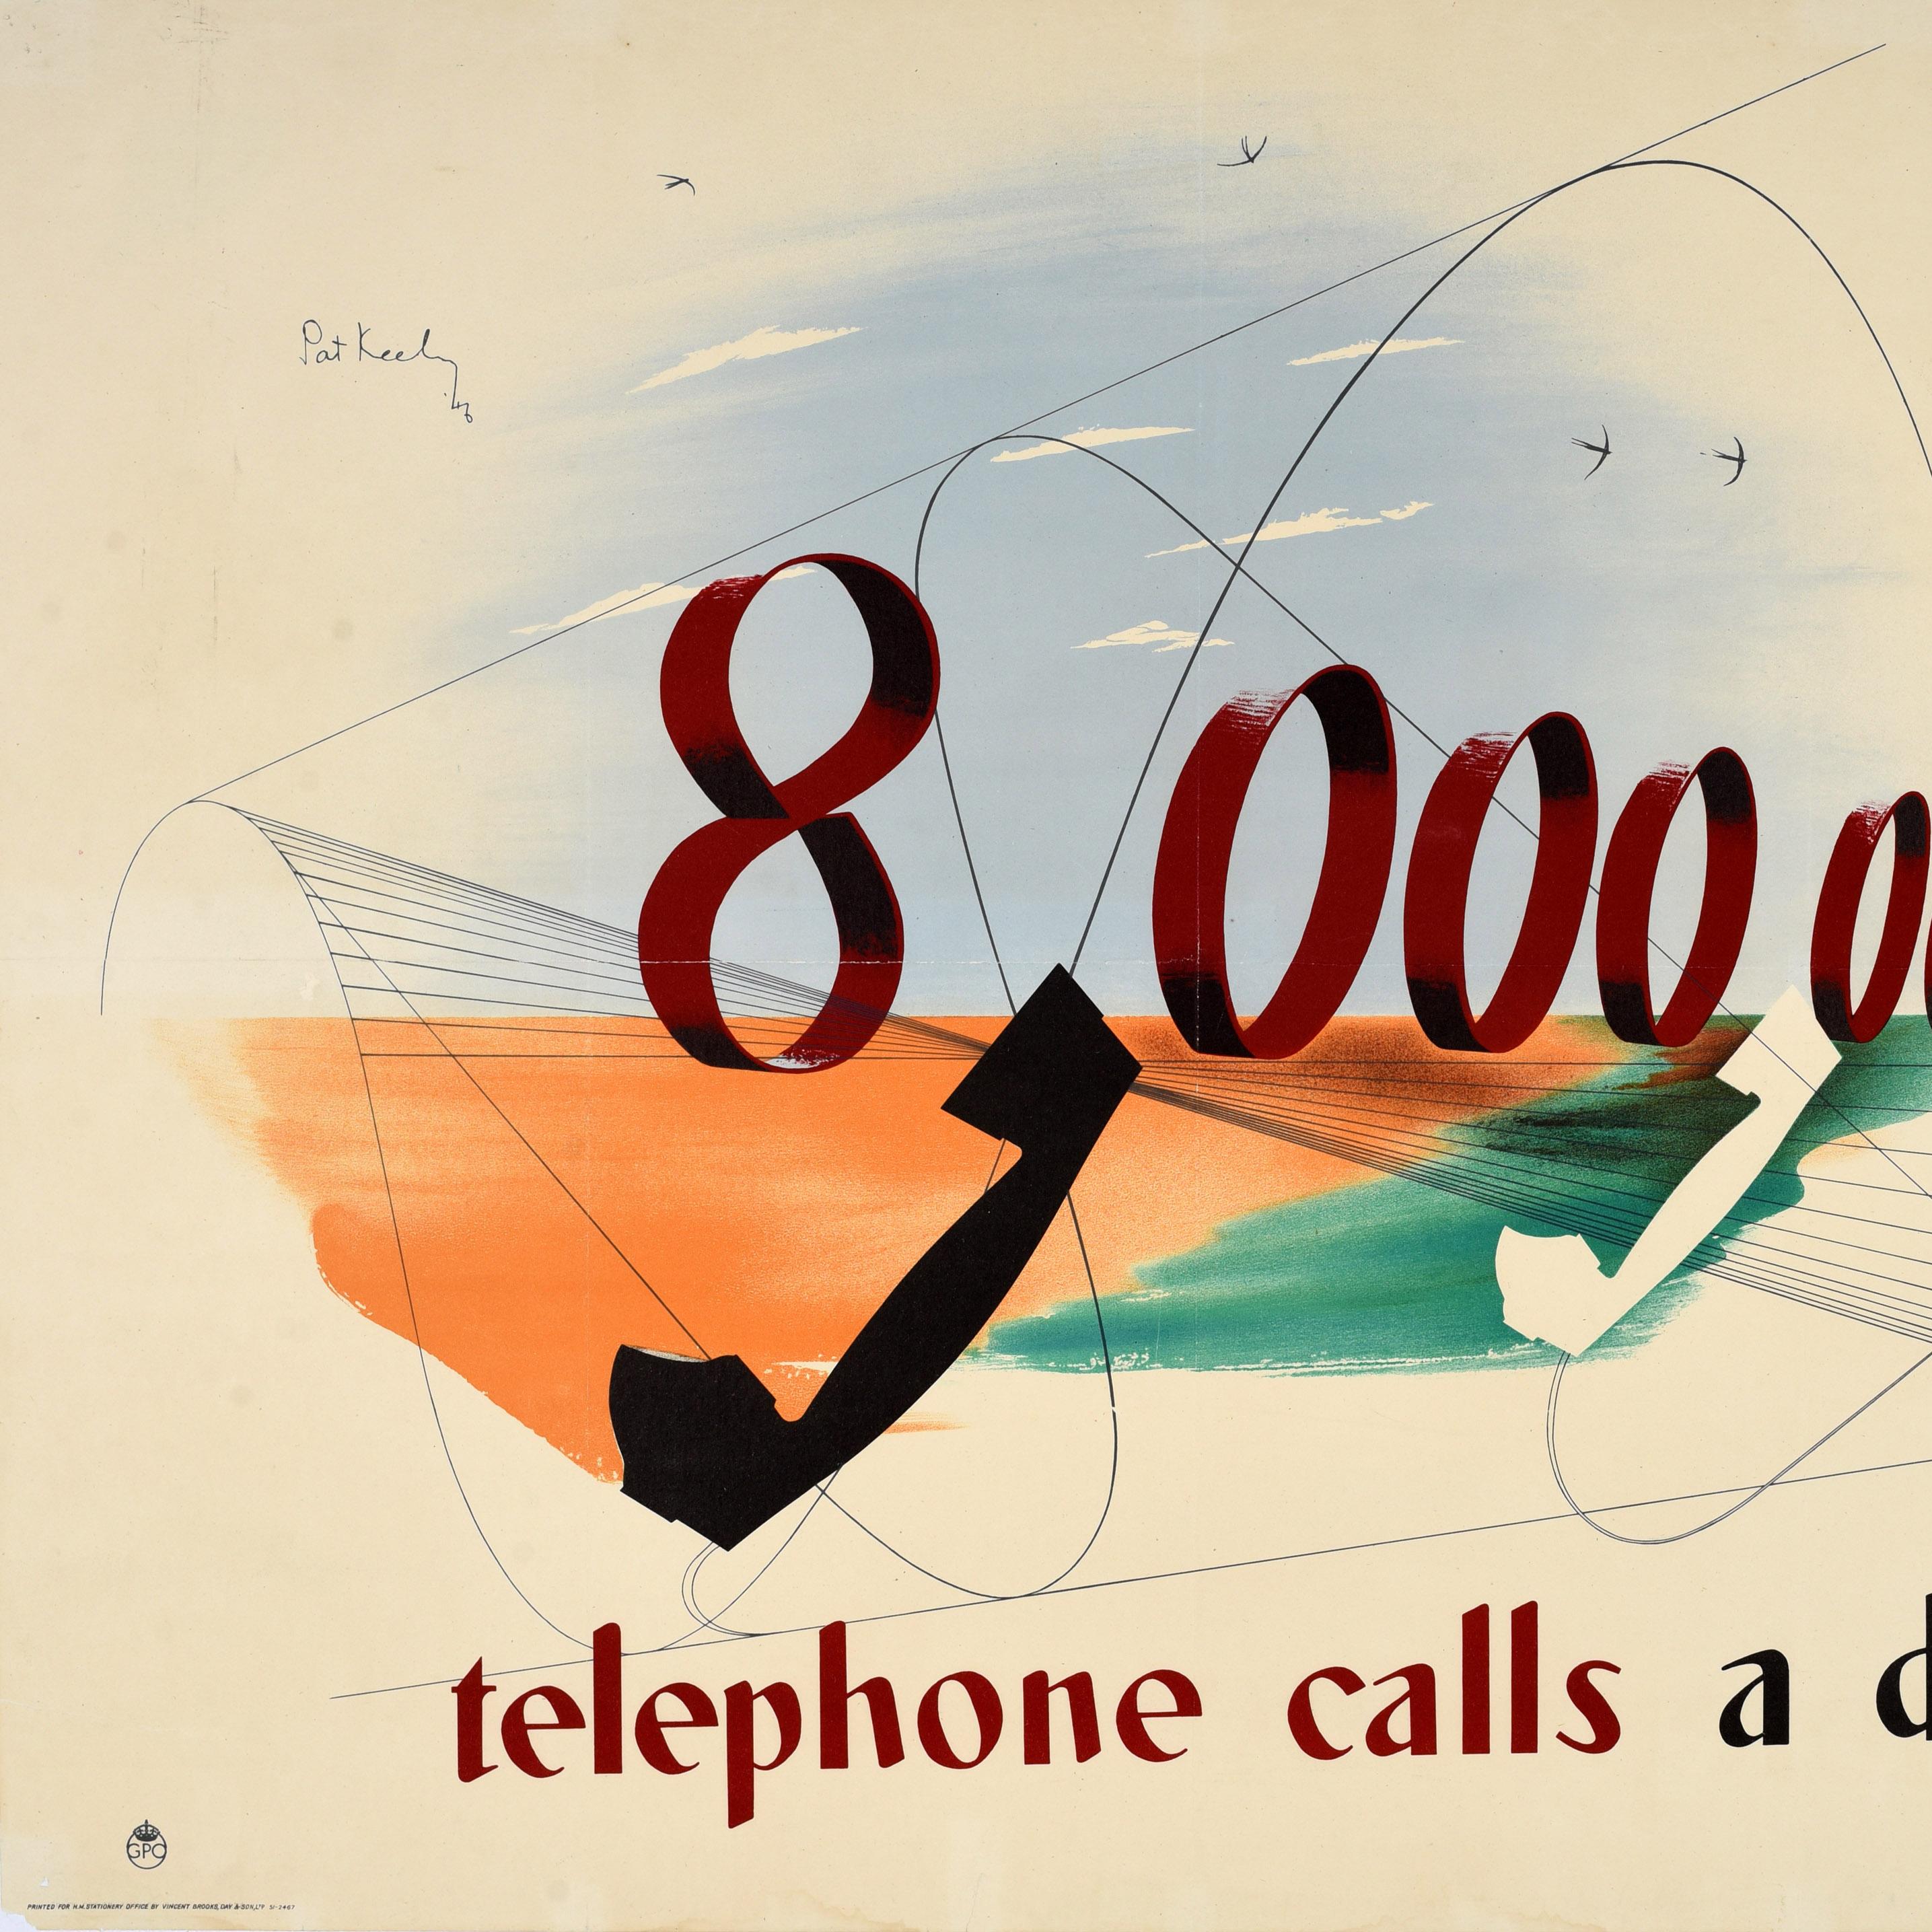 Original vintage poster published by the General Post Office GPO - 8,000,000 telephone calls a day - featuring a great graphic design by the notable British artist Pat Keely (Patrick Cokayne Keely; 1901-1970) depicting the large numbers in deep red